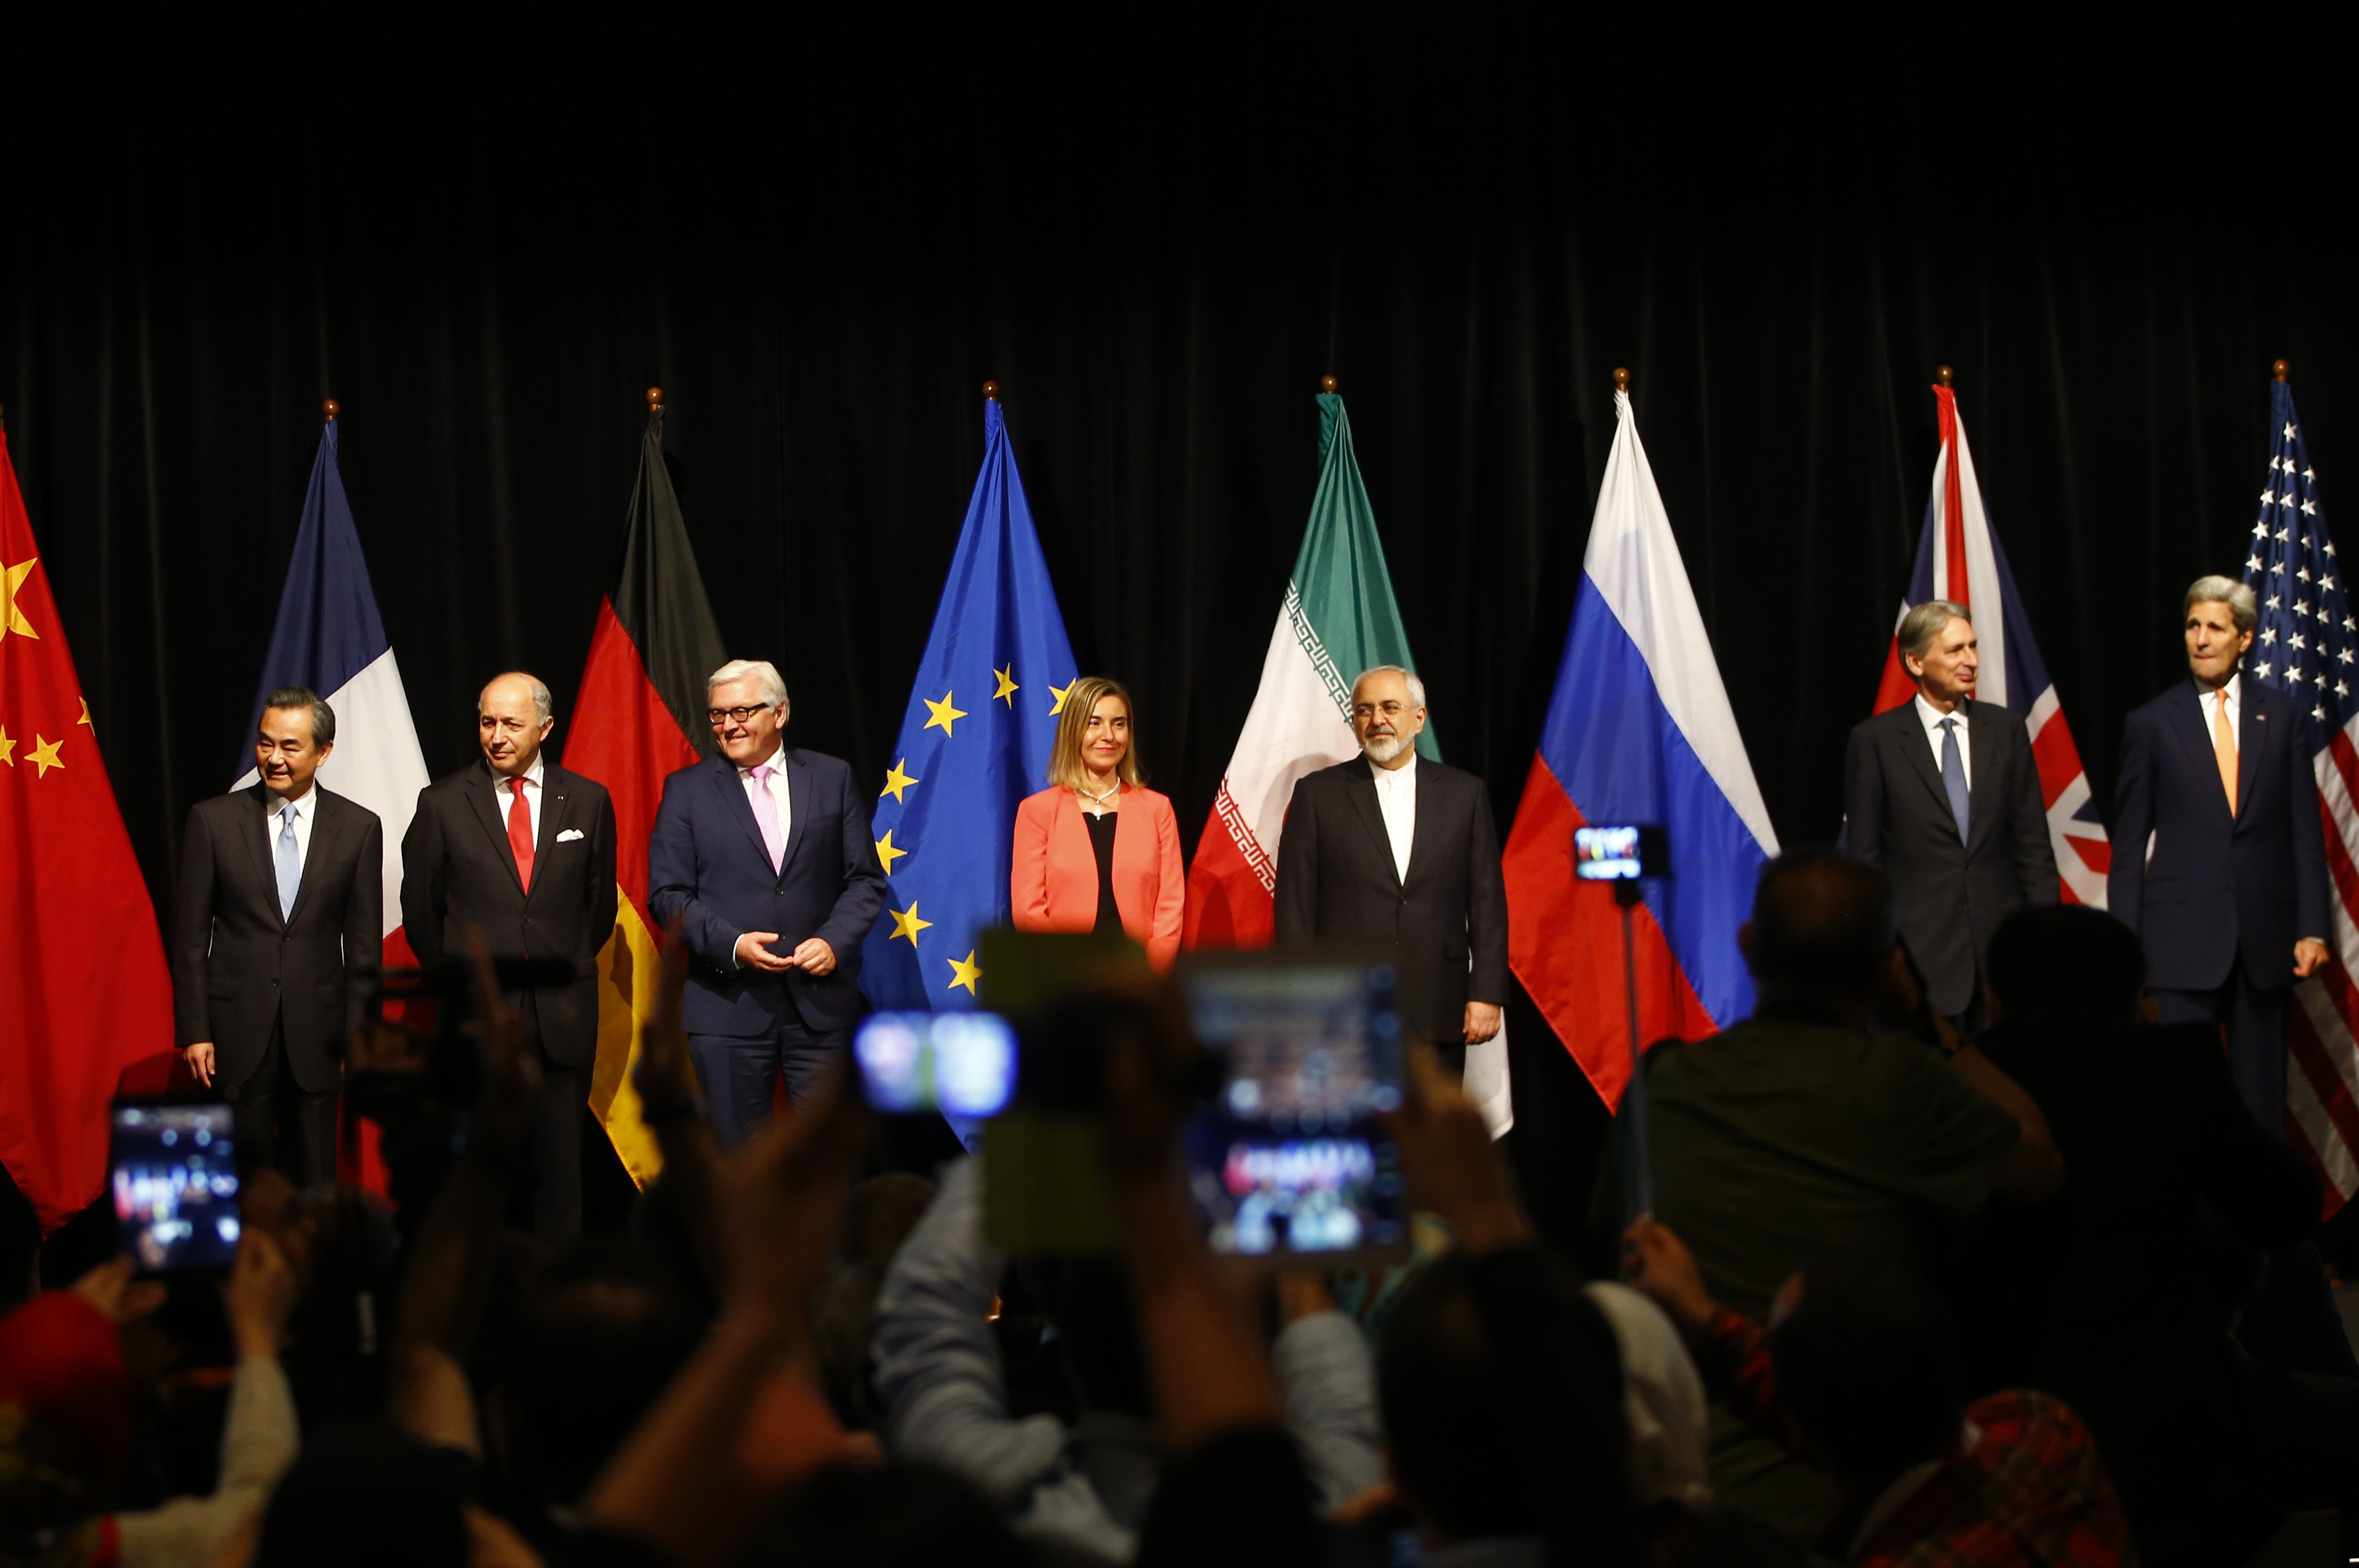 Representatives pose after Iran and six major world powers reached a nuclear deal, capping more than a decade of on-off negotiations, July 14, 2015 (Reuters)